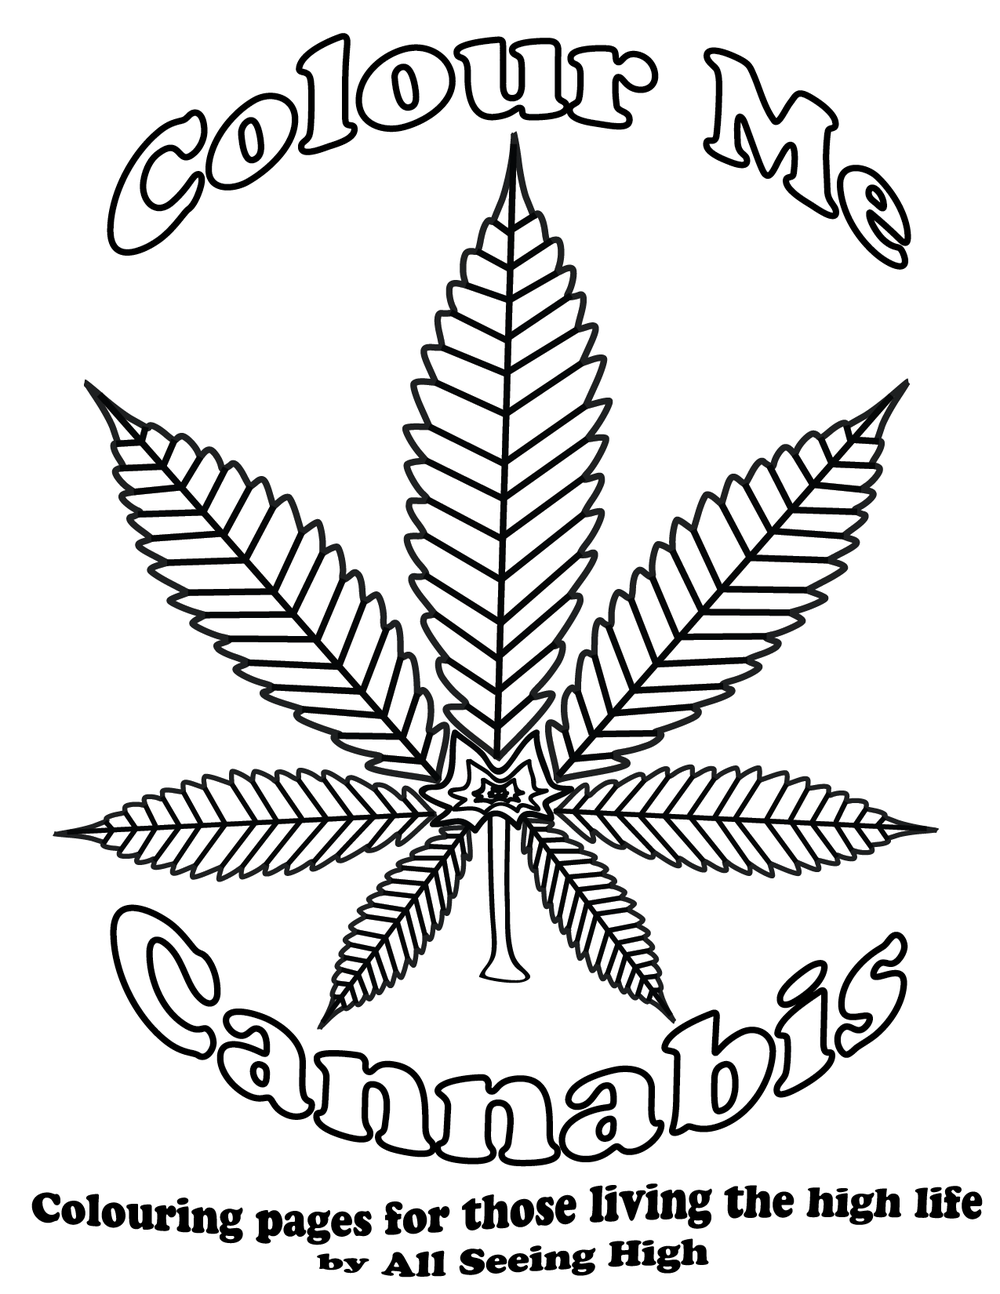 420 Weed Coloring Pages Coloring Pages